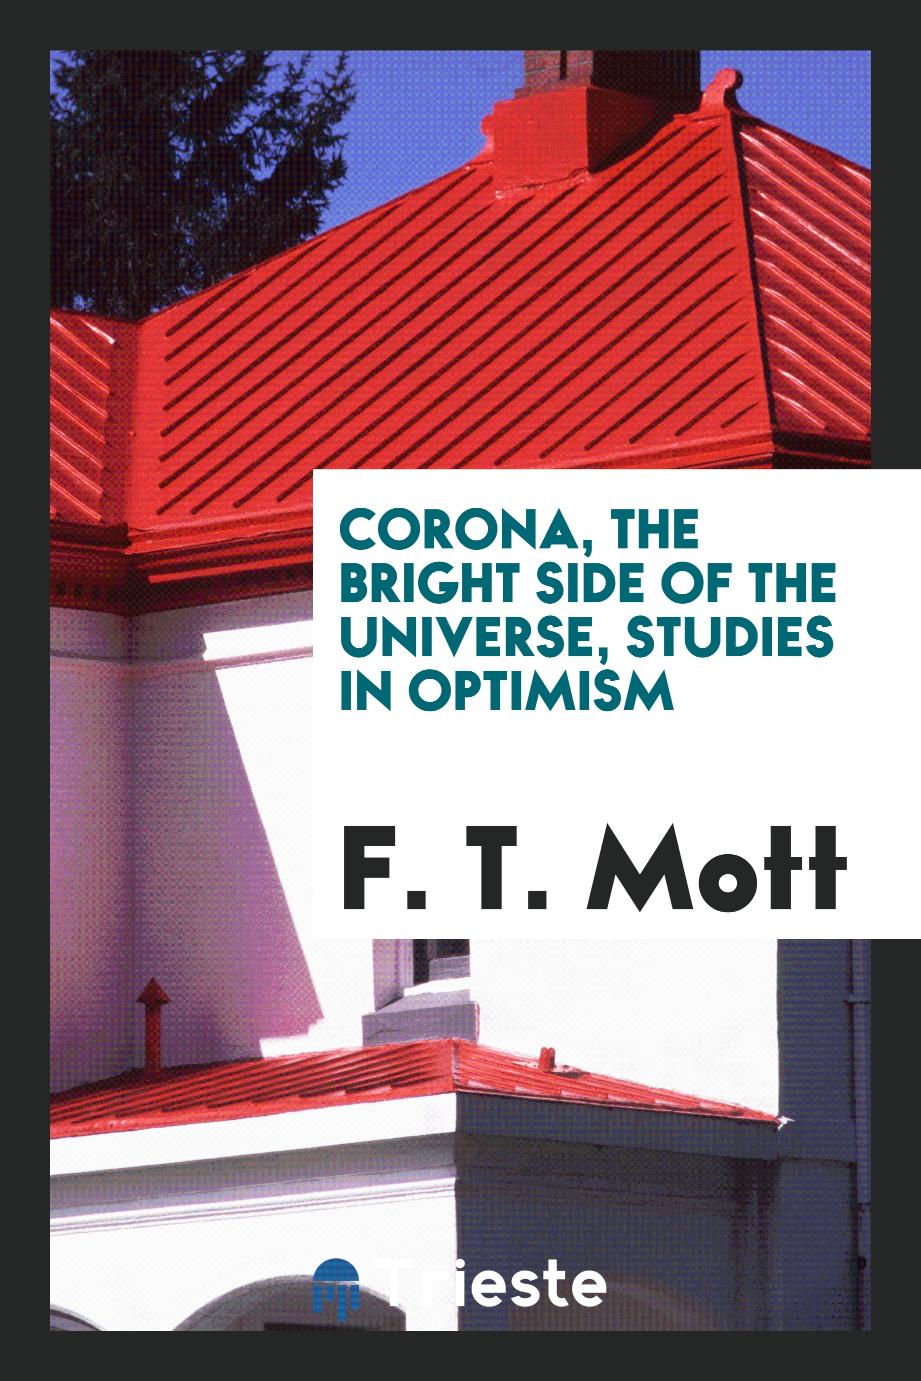 Corona, the bright side of the universe, studies in optimism